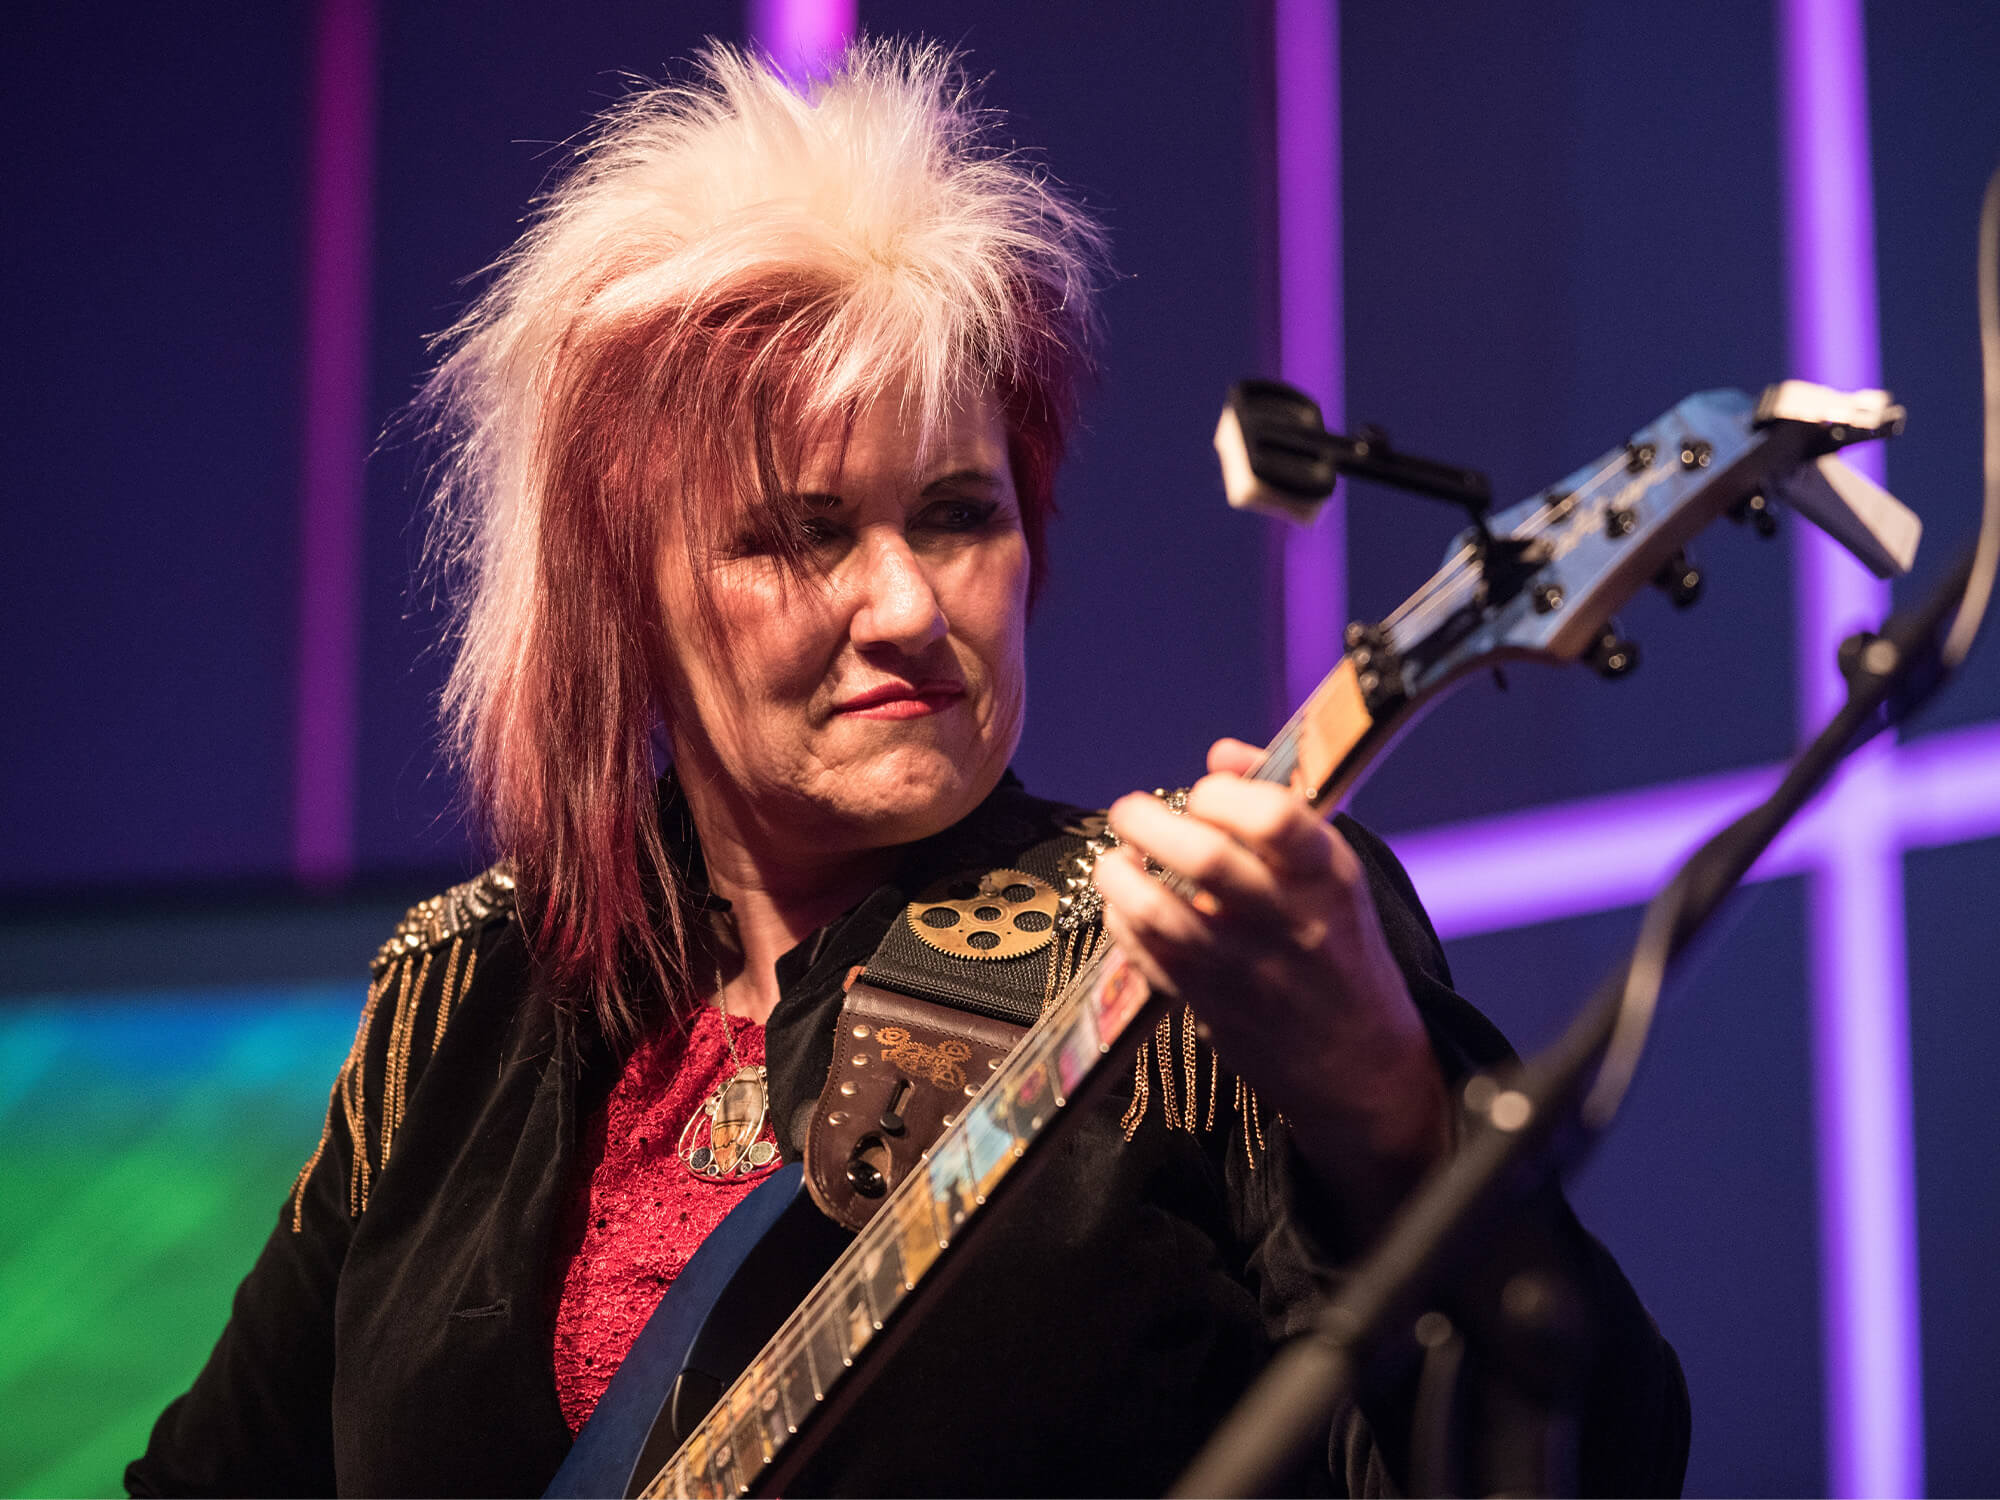 Jennifer Batten on stage. She is looking directly at her fretboard as she is playing and has vibrant pink in her hair.